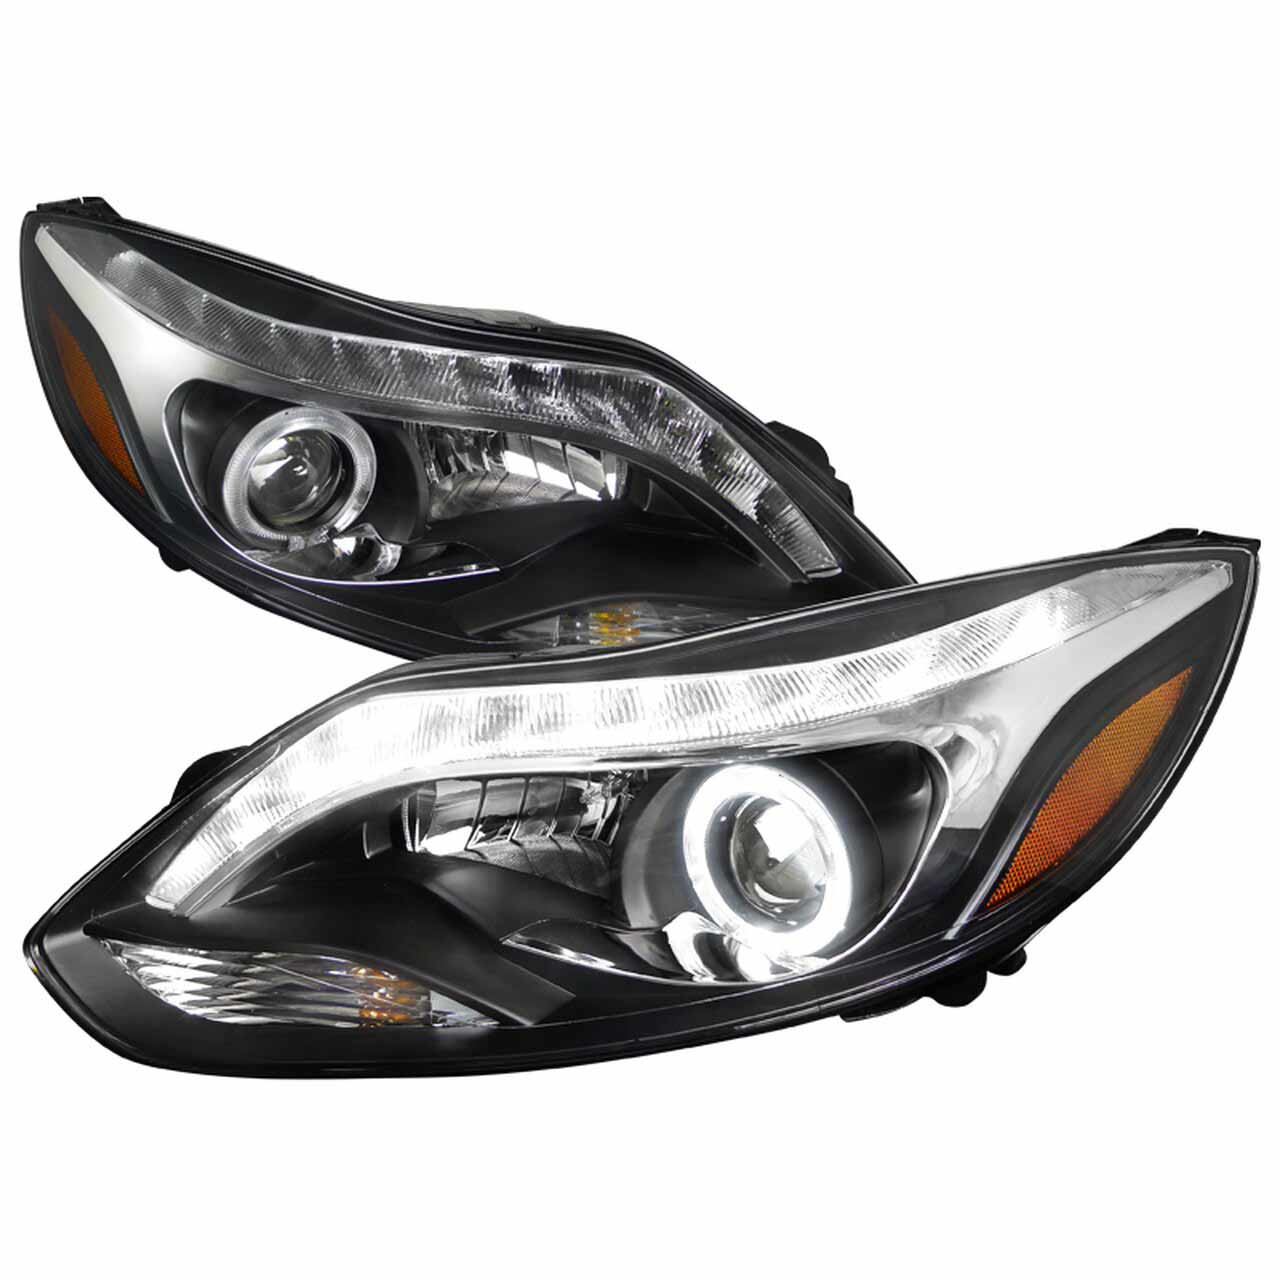 Ford LED headlamps